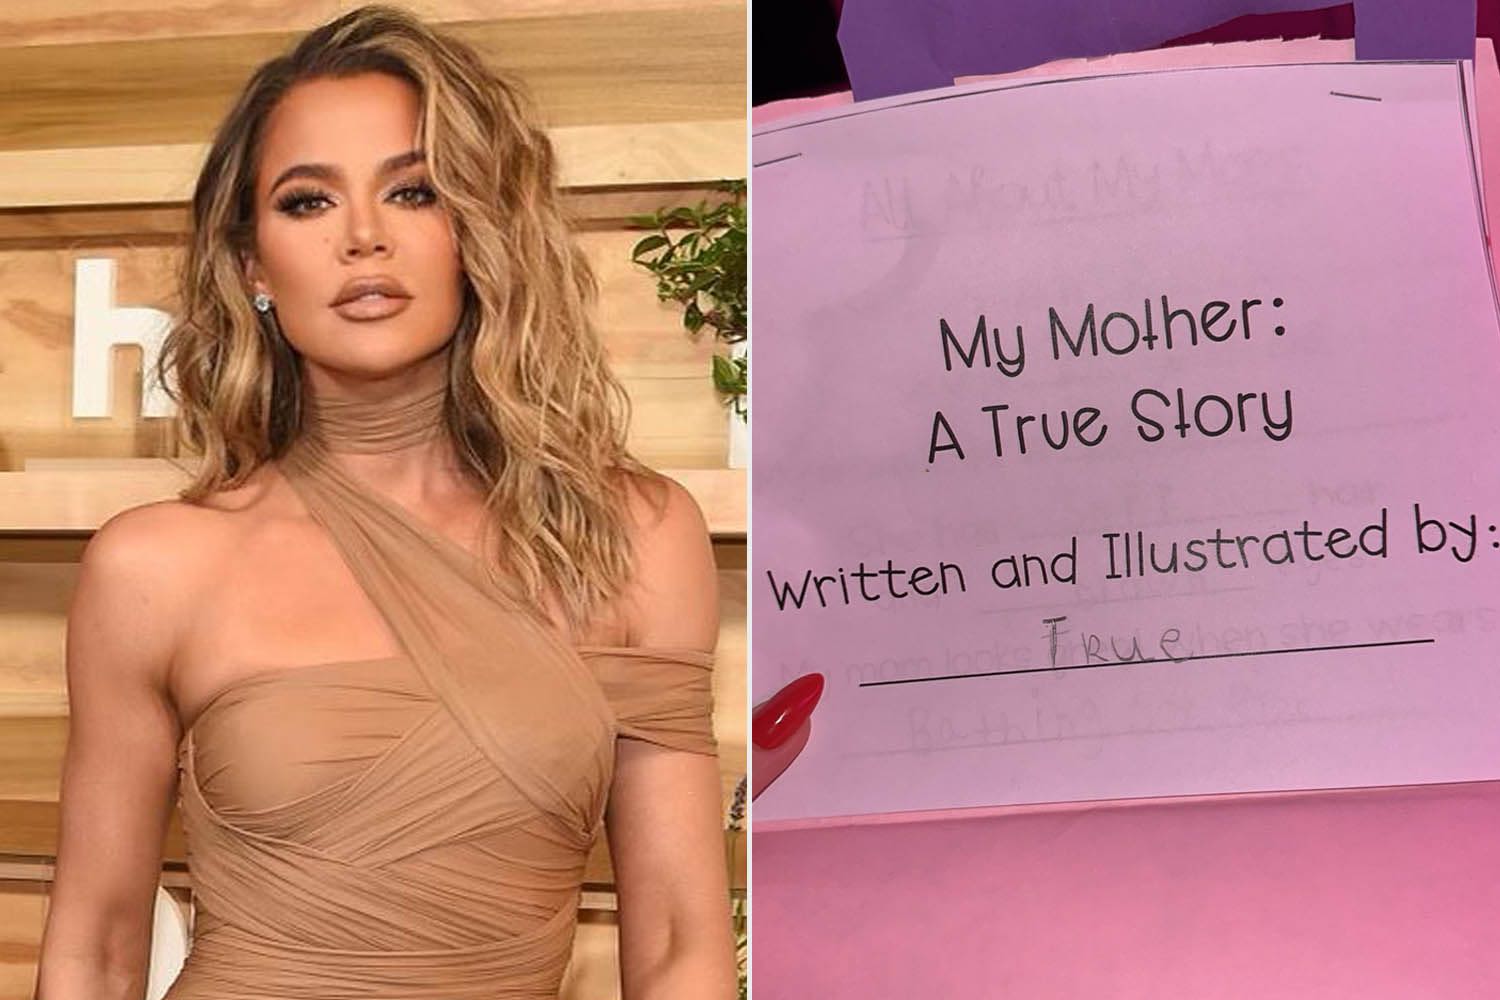 Khloé Kardashian Reveals Daughter True Wrote and Illustrated a Story About Her for Mother's Day